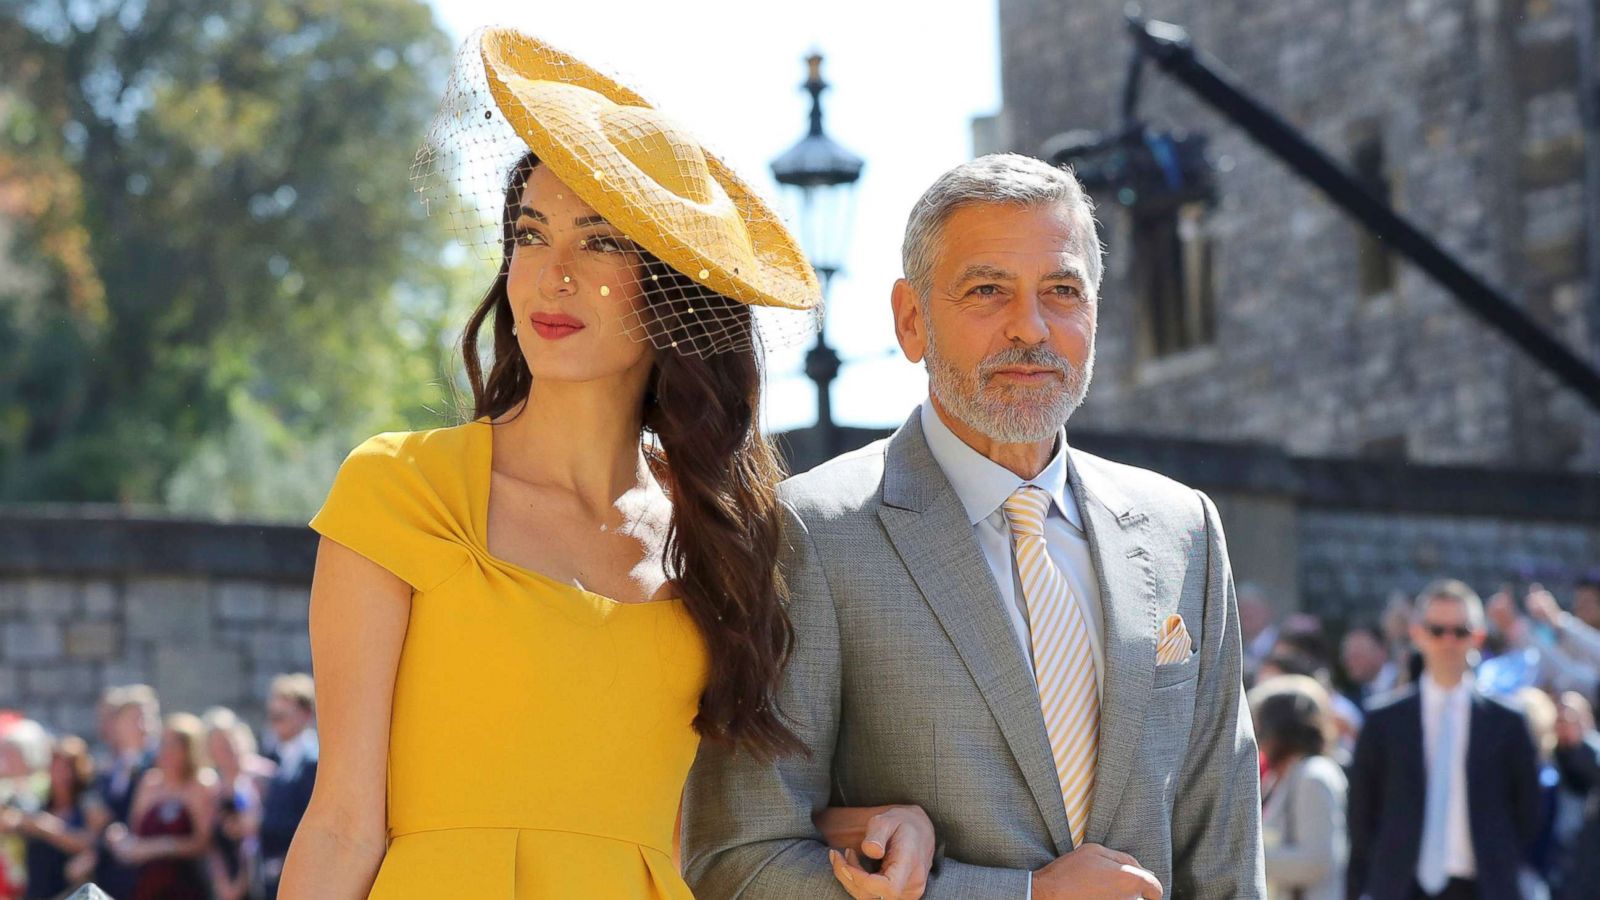 PHOTO: Amal Clooney and George Clooney arrive for the wedding ceremony of Prince Harry and Meghan Markle at St. George's Chapel in Windsor Castle in Windsor, May 19, 2018.